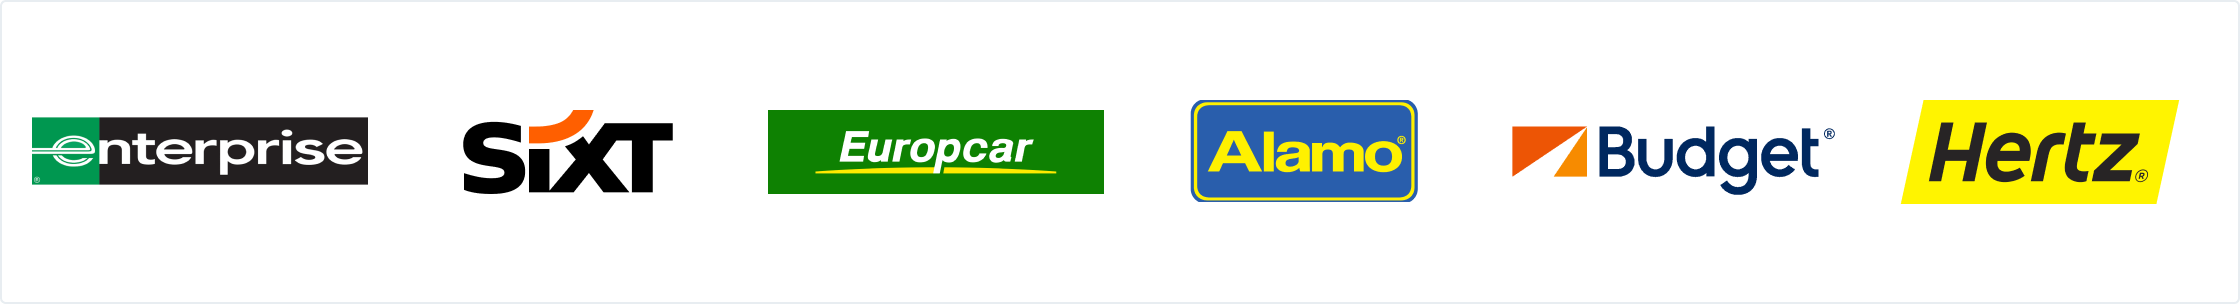 Offers from the biggest car hire companies: Enterprise, Sixt, Europcar, Alamo, Budget or Hertz